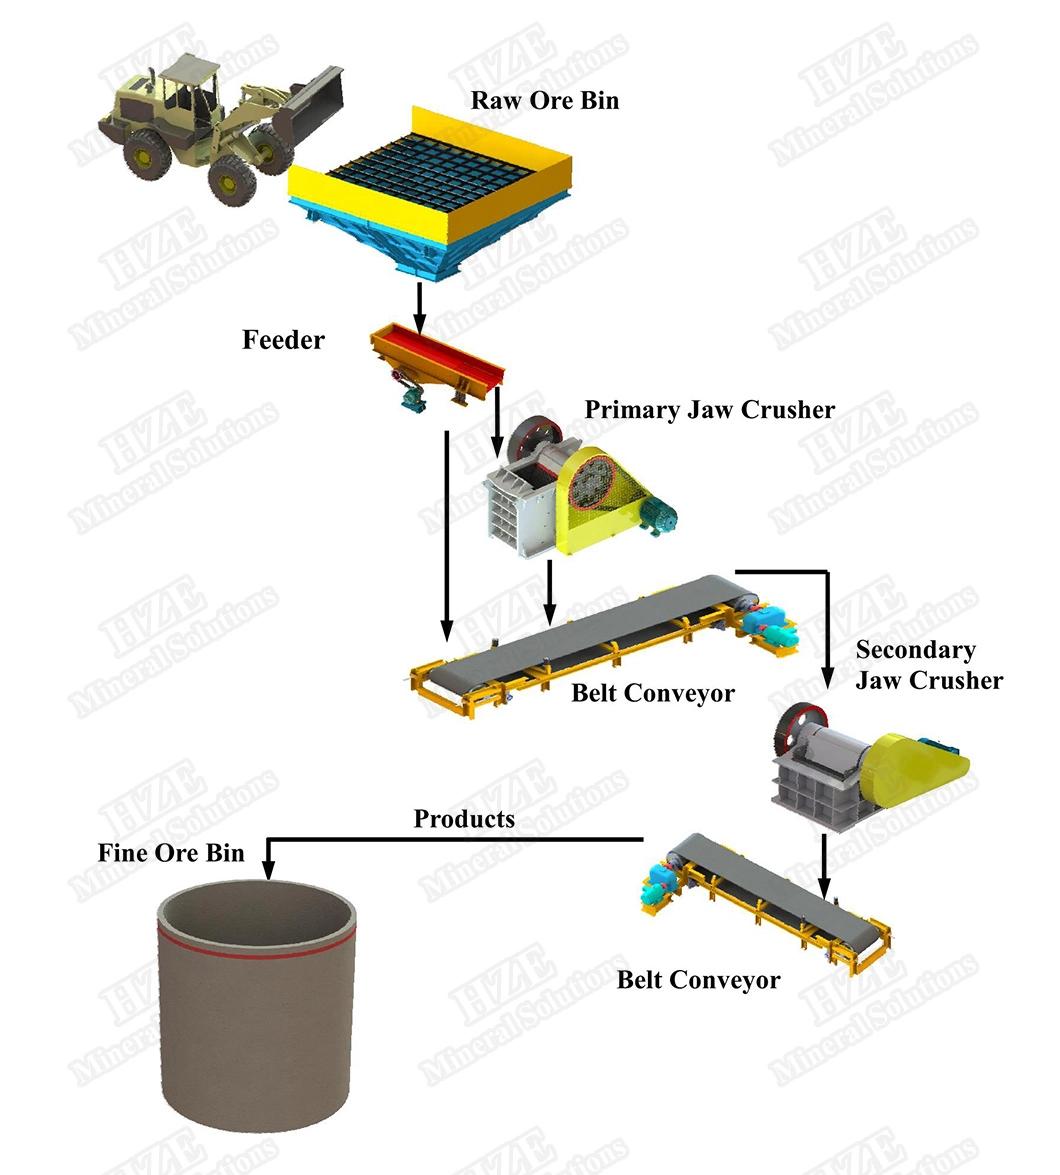 Rock Ore Crushing Circuit and Equipment with Flowchart